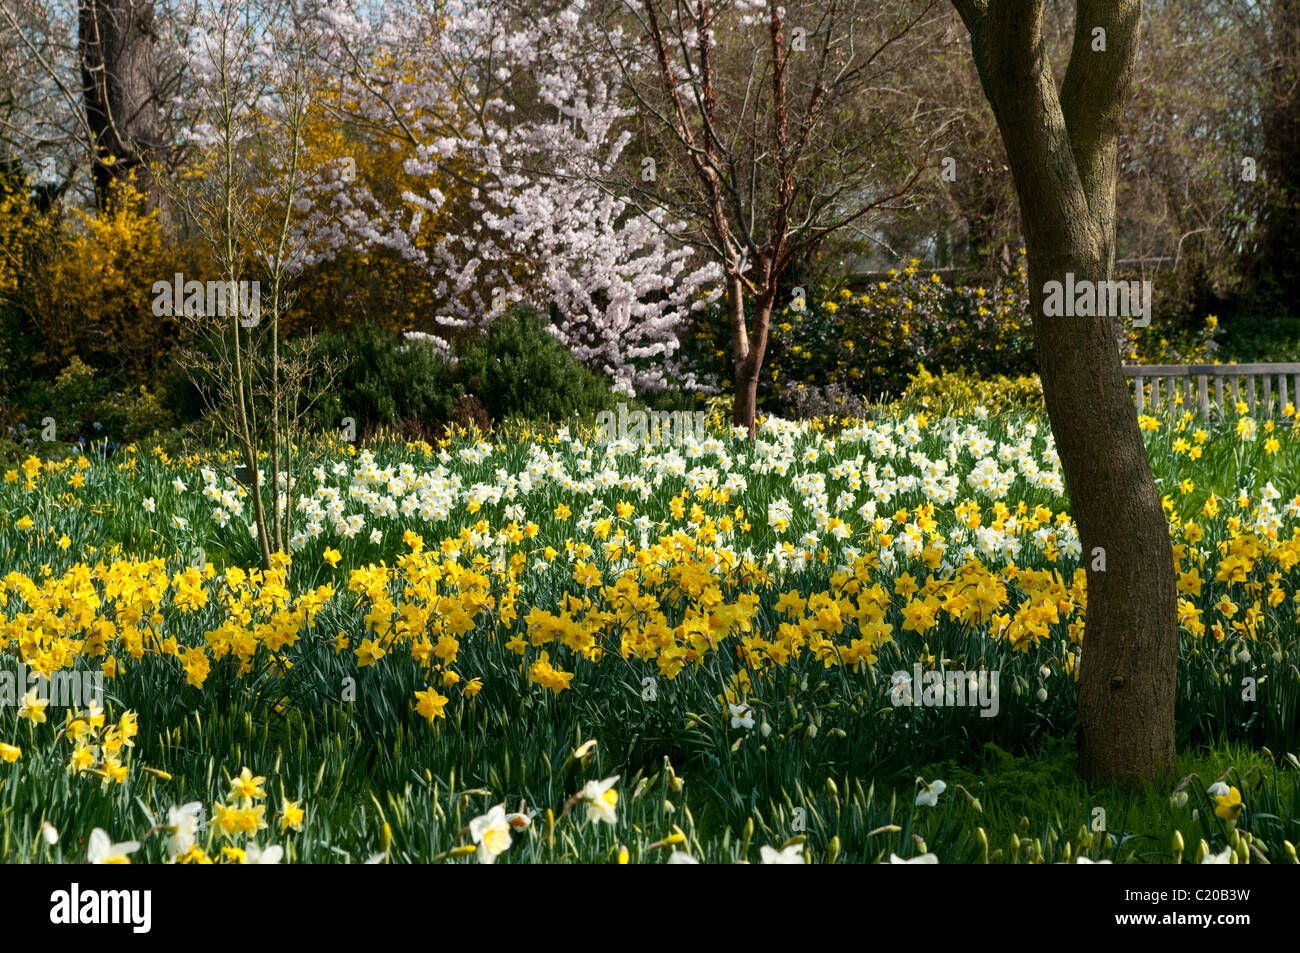 Daffodils and trees in bloom in early spring, Hampton Court Palace grounds, Surrey, England, UK Stock Photo